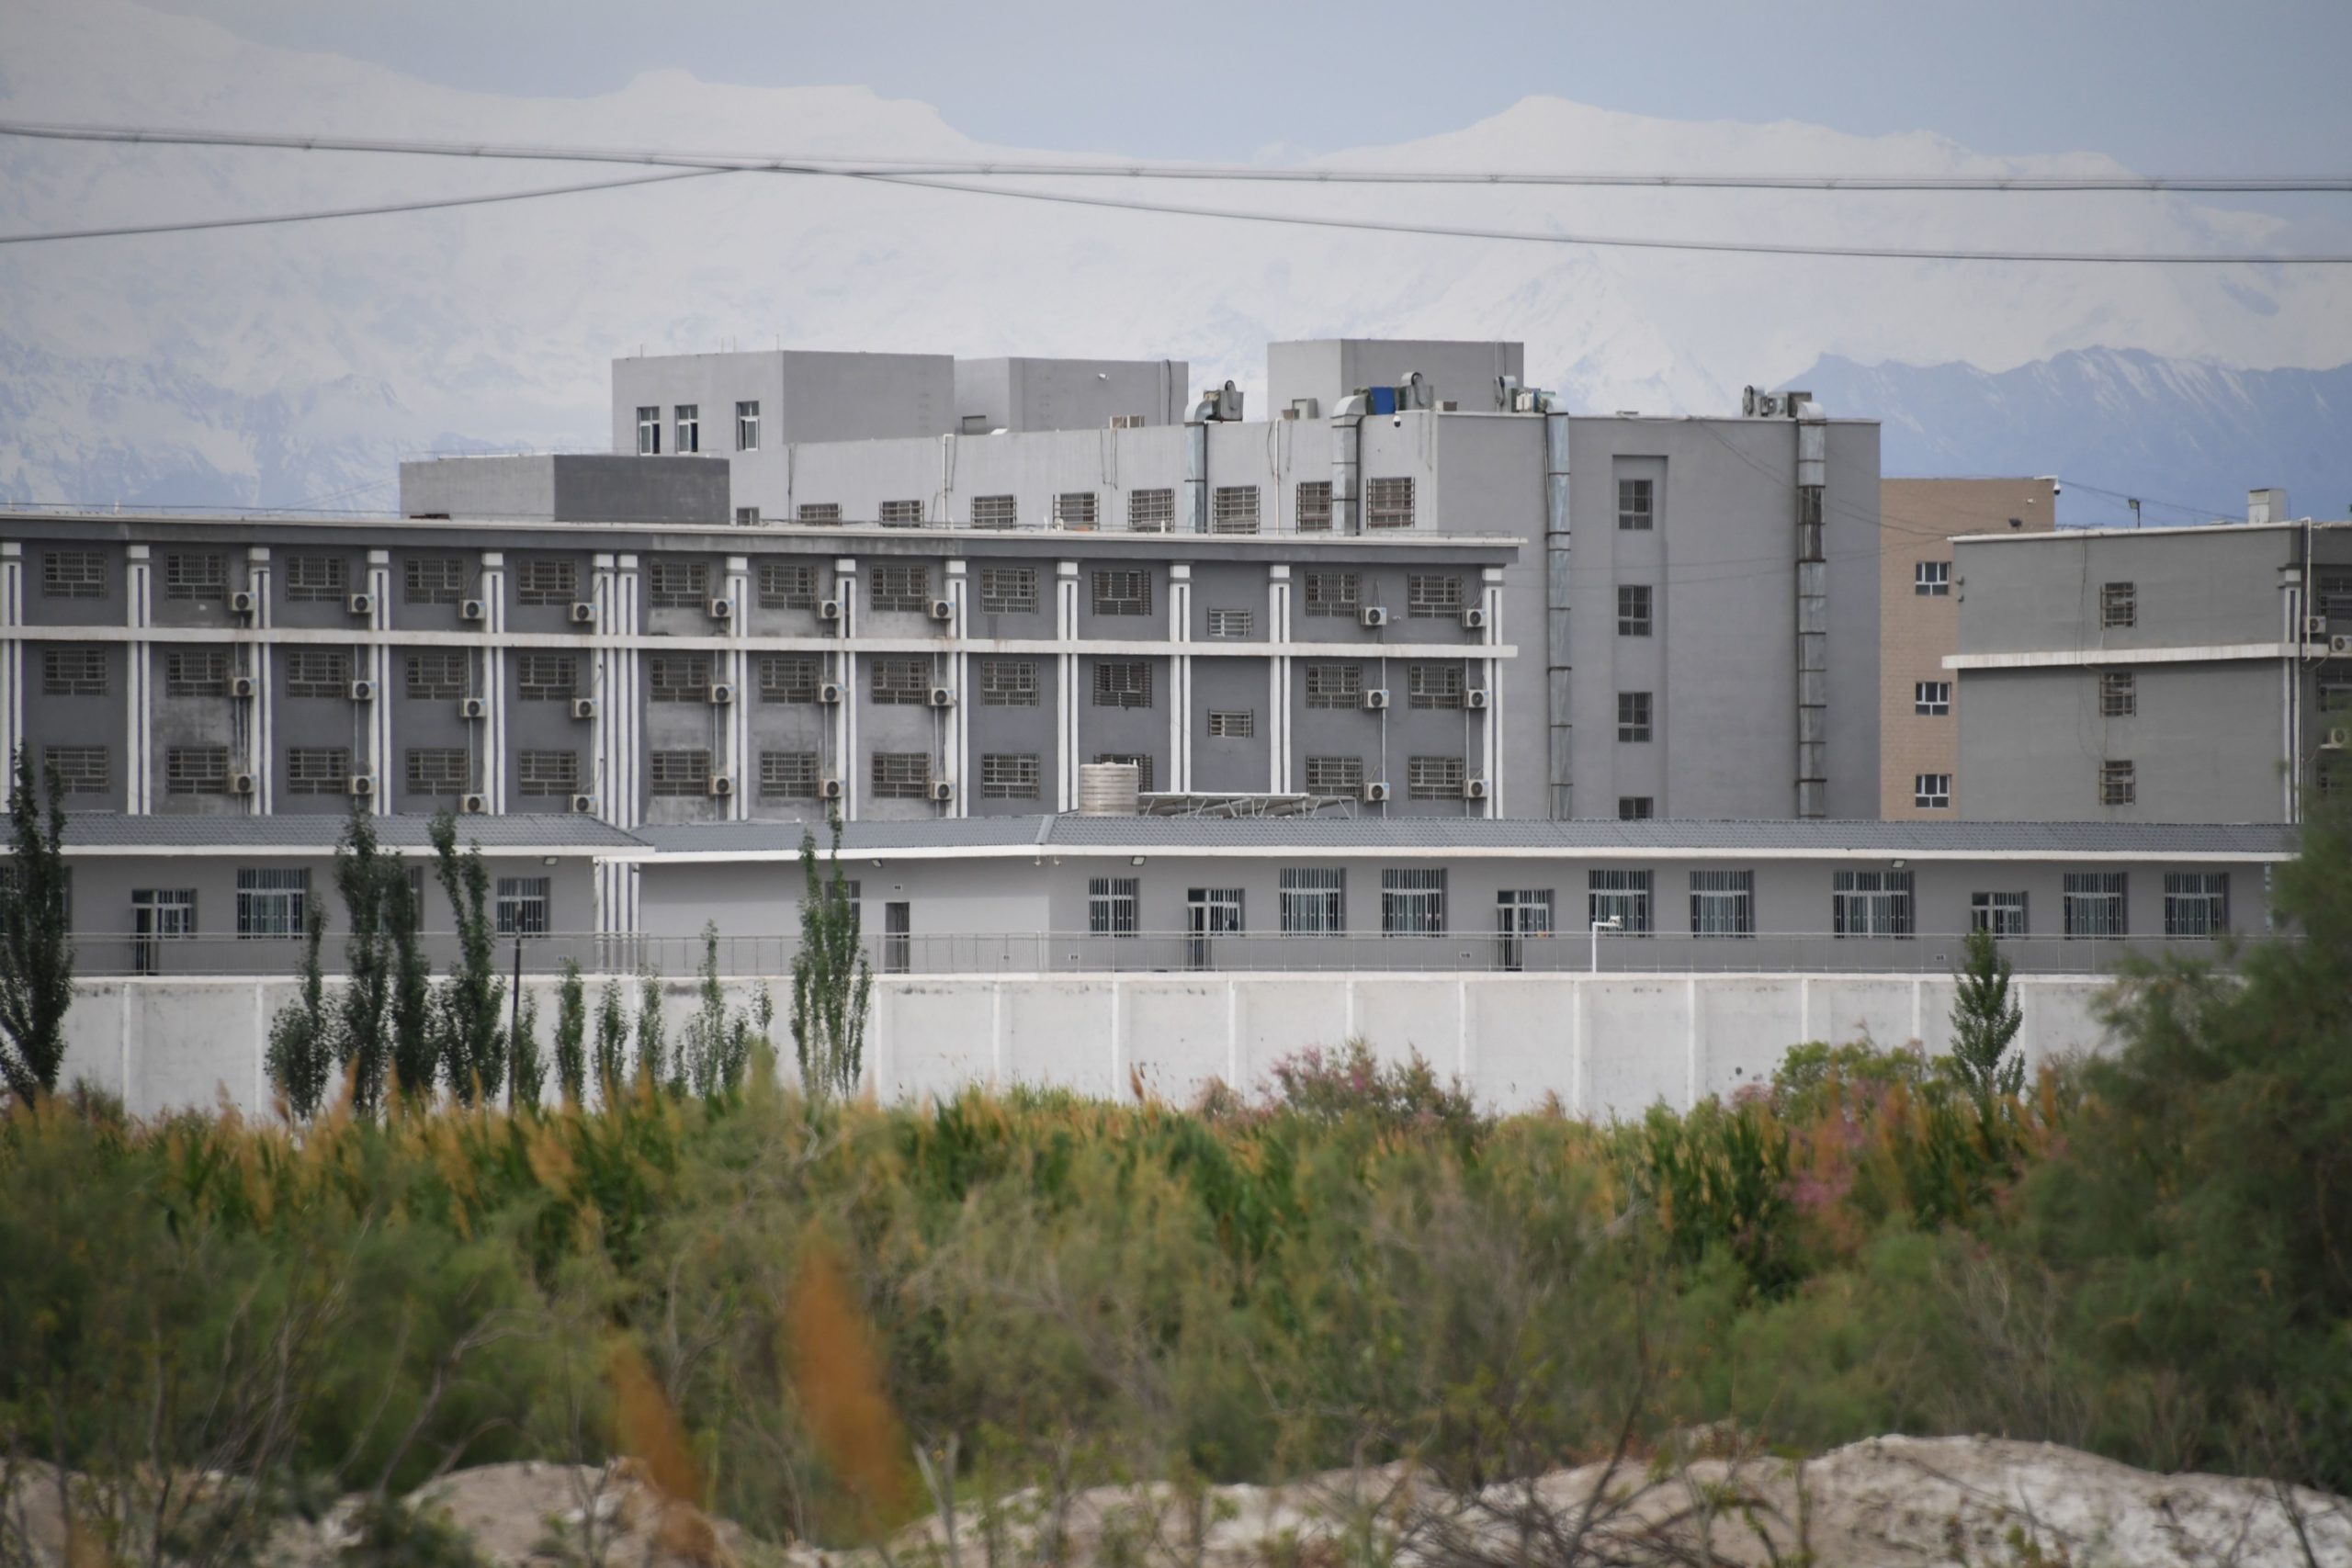 This photo taken on June 4, 2019 shows a facility believed to be a re-education camp where mostly Muslim ethnic minorities are detained, north of Akto in China's northwestern Xinjiang region. (Greg Baker/AFP via Getty Images)